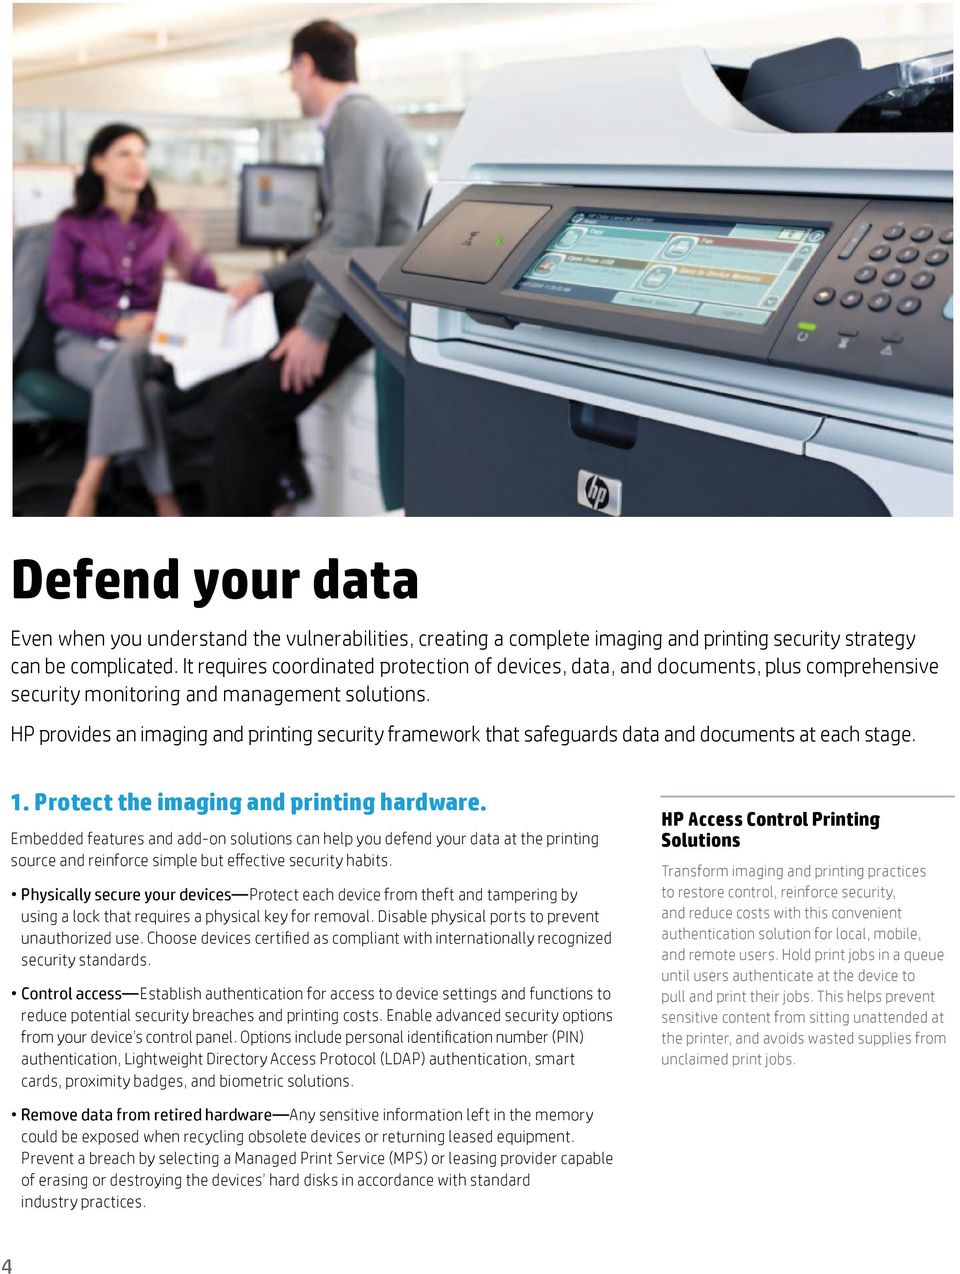 HP provides an imaging and printing security framework that safeguards data and documents at each stage. 1. Protect the imaging and printing hardware.